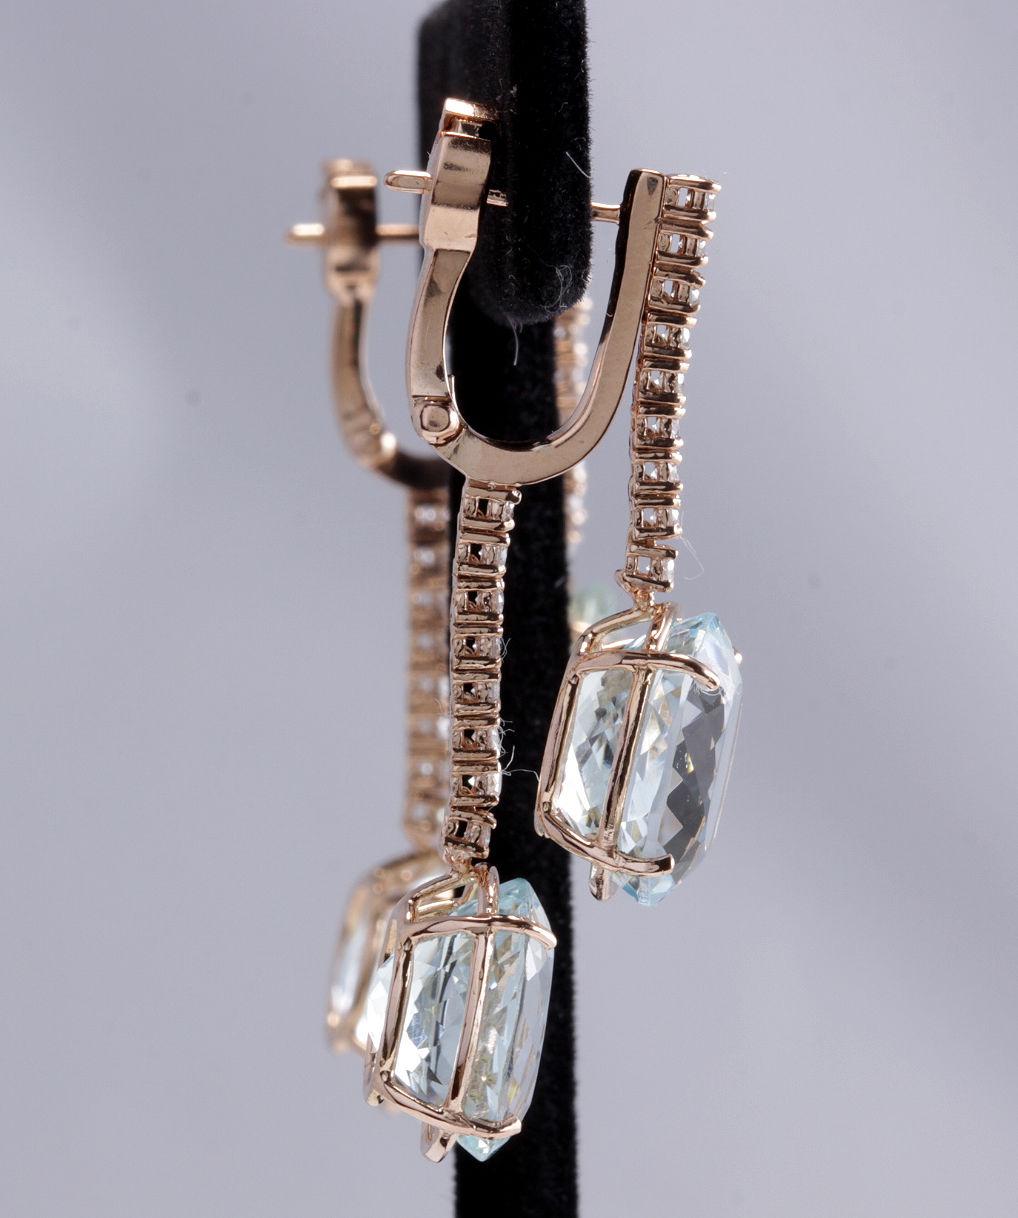 Exquisite 21.79 Carat Natural Aquamarine and Diamond 14 Karat Solid Rose Gold In New Condition For Sale In Los Angeles, CA